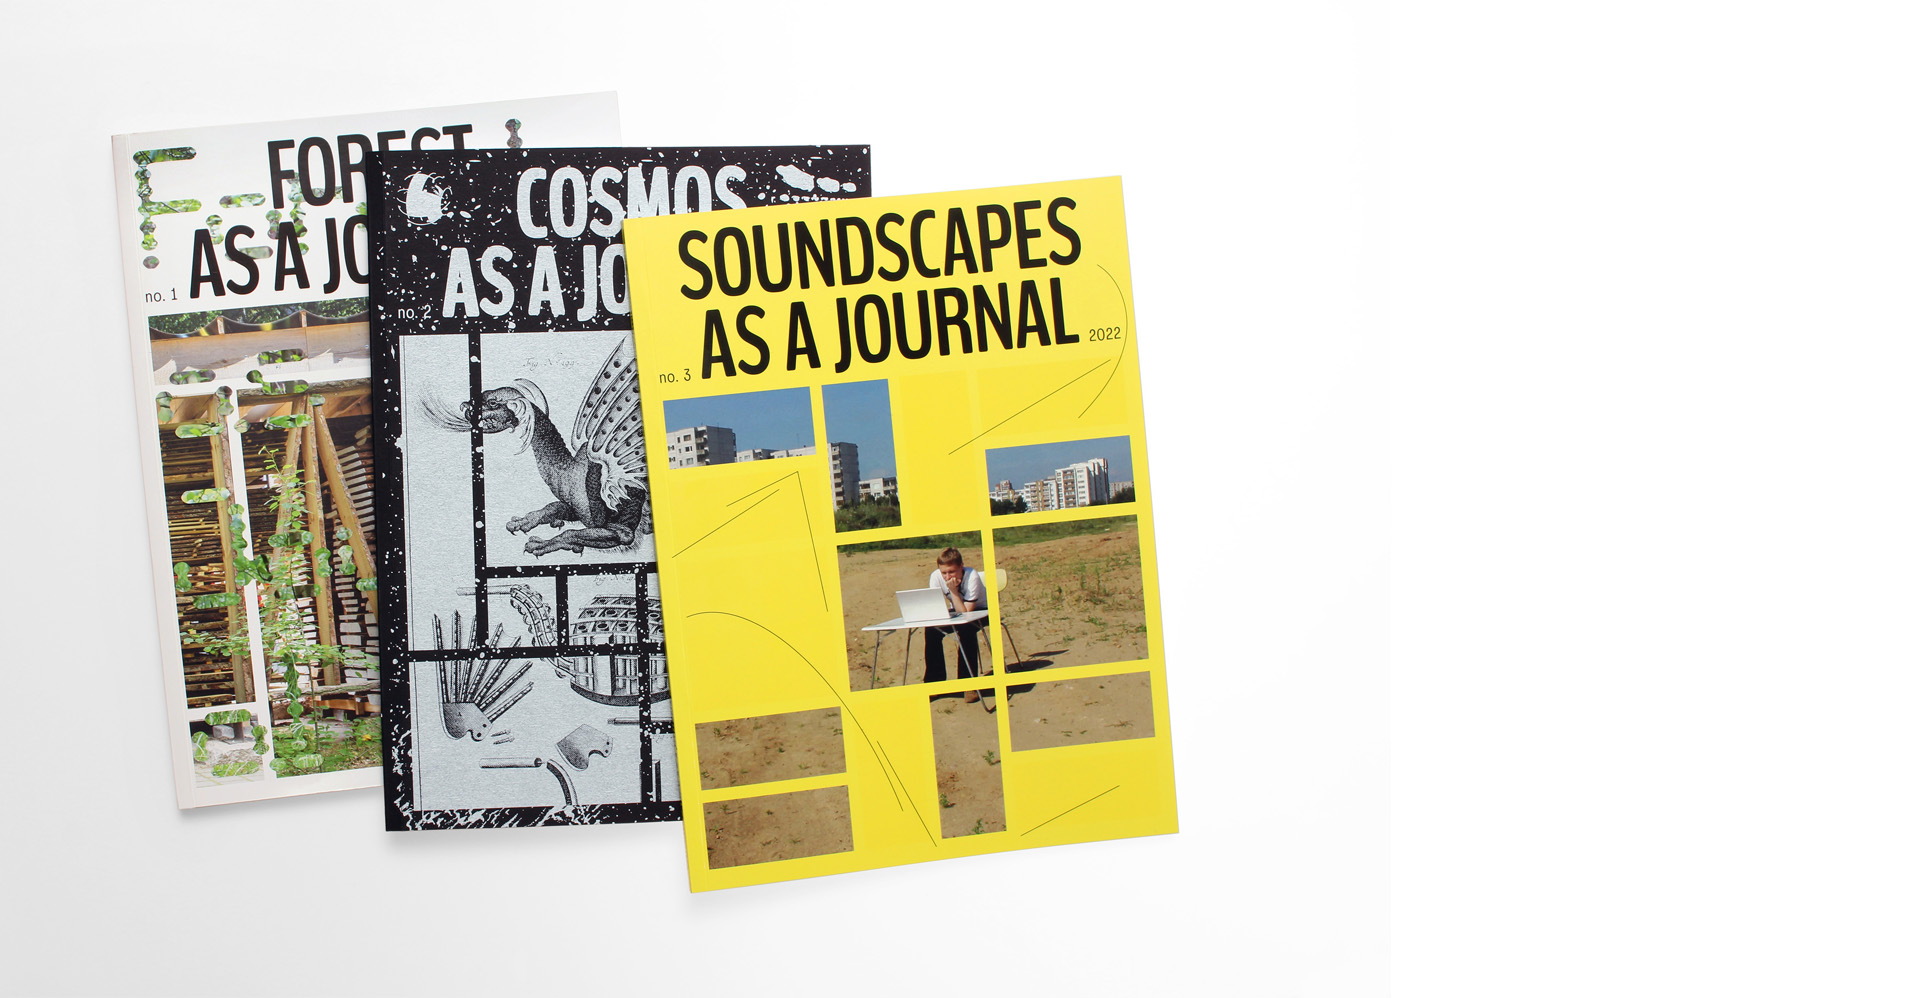 SOUNDSCAPES AS A JOURNAL